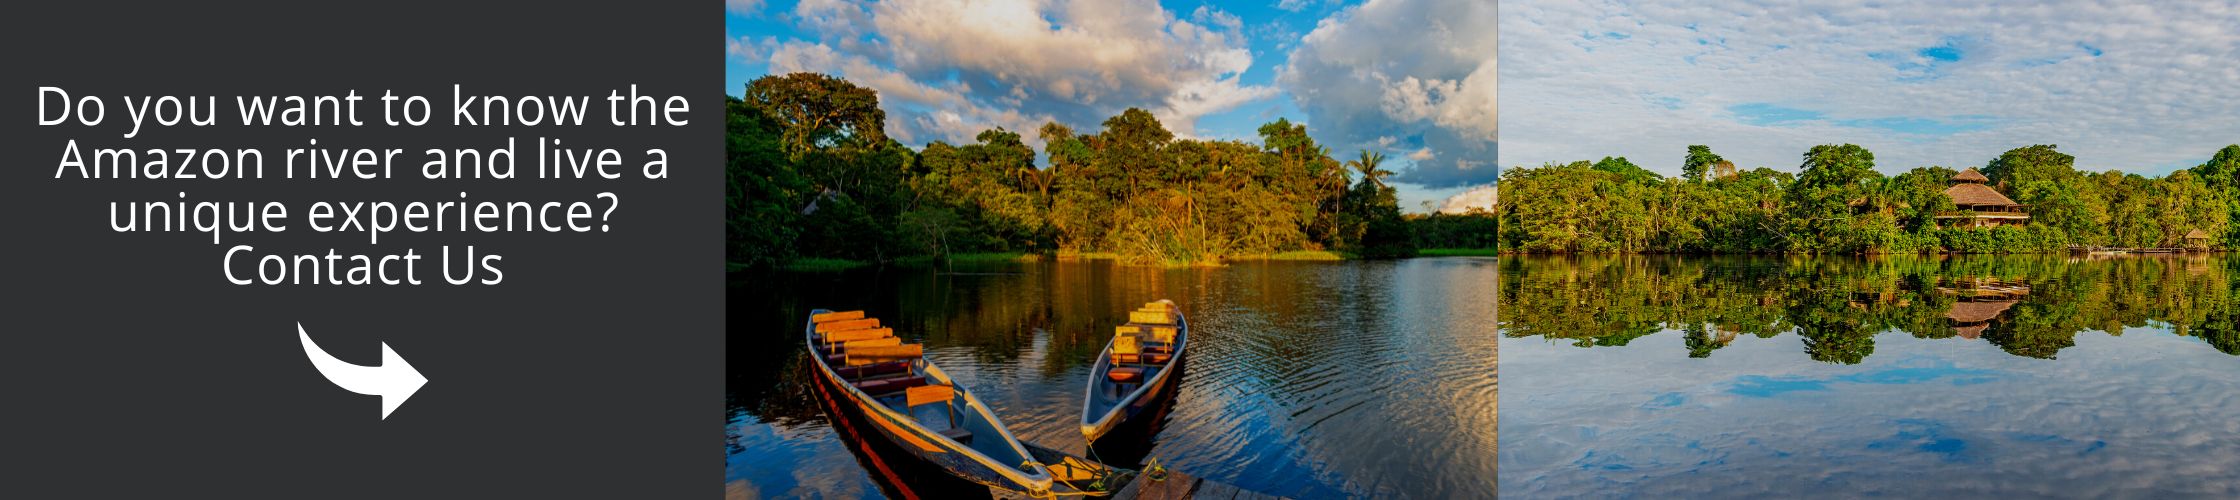 Visit Amazon river with us